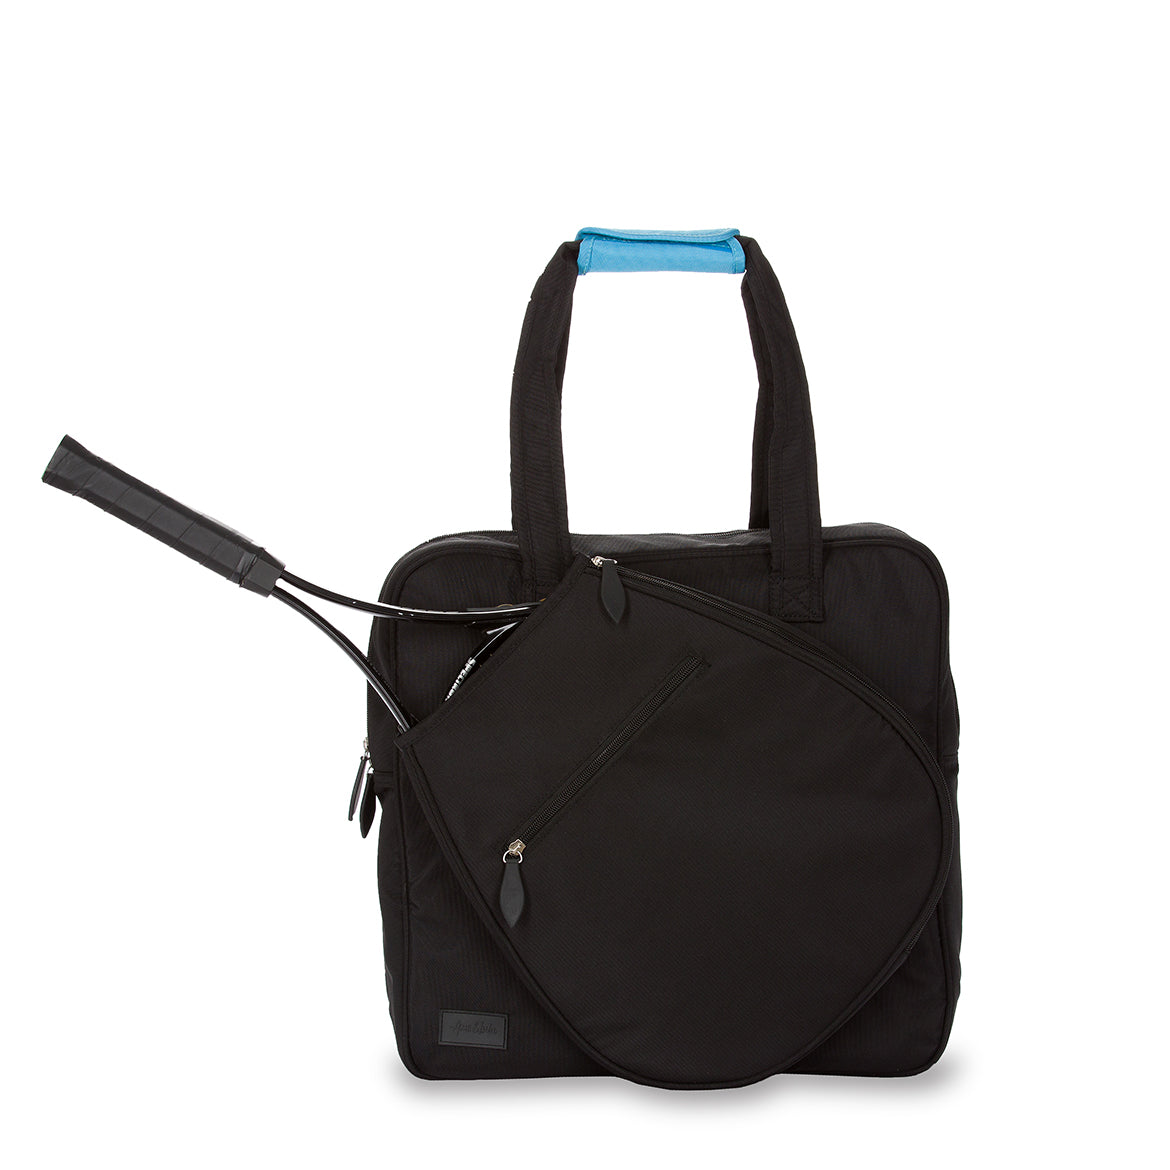 Front view of black sweet shot tennis tote. Tote has tennis racquet in front pocket. There is a blue handle cap on it.